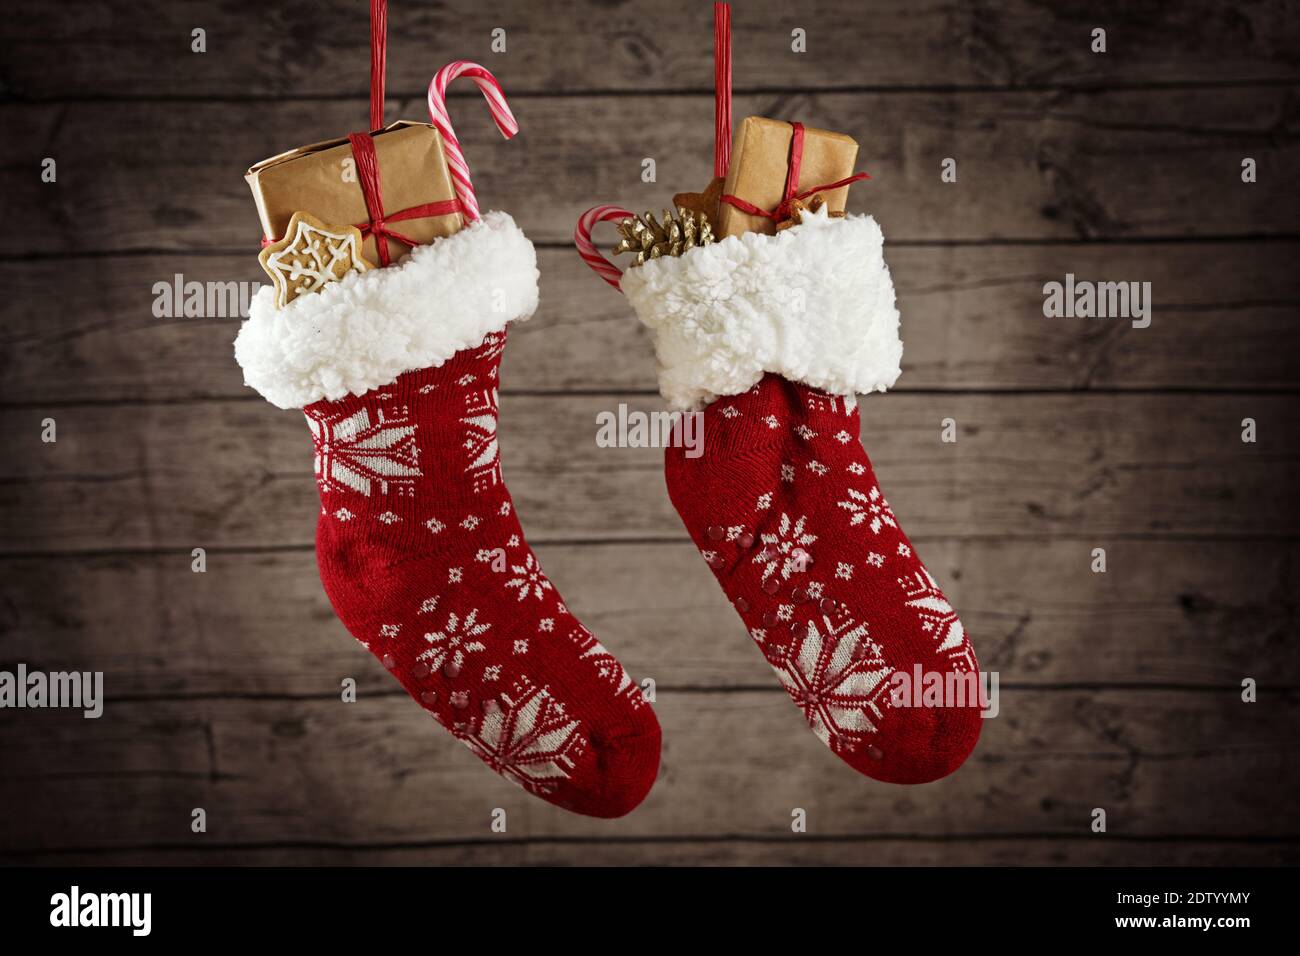 Pair of Christmas stockings filled with gifts and sweets hanging in front of a rustic wooden wall, selected focus Stock Photo